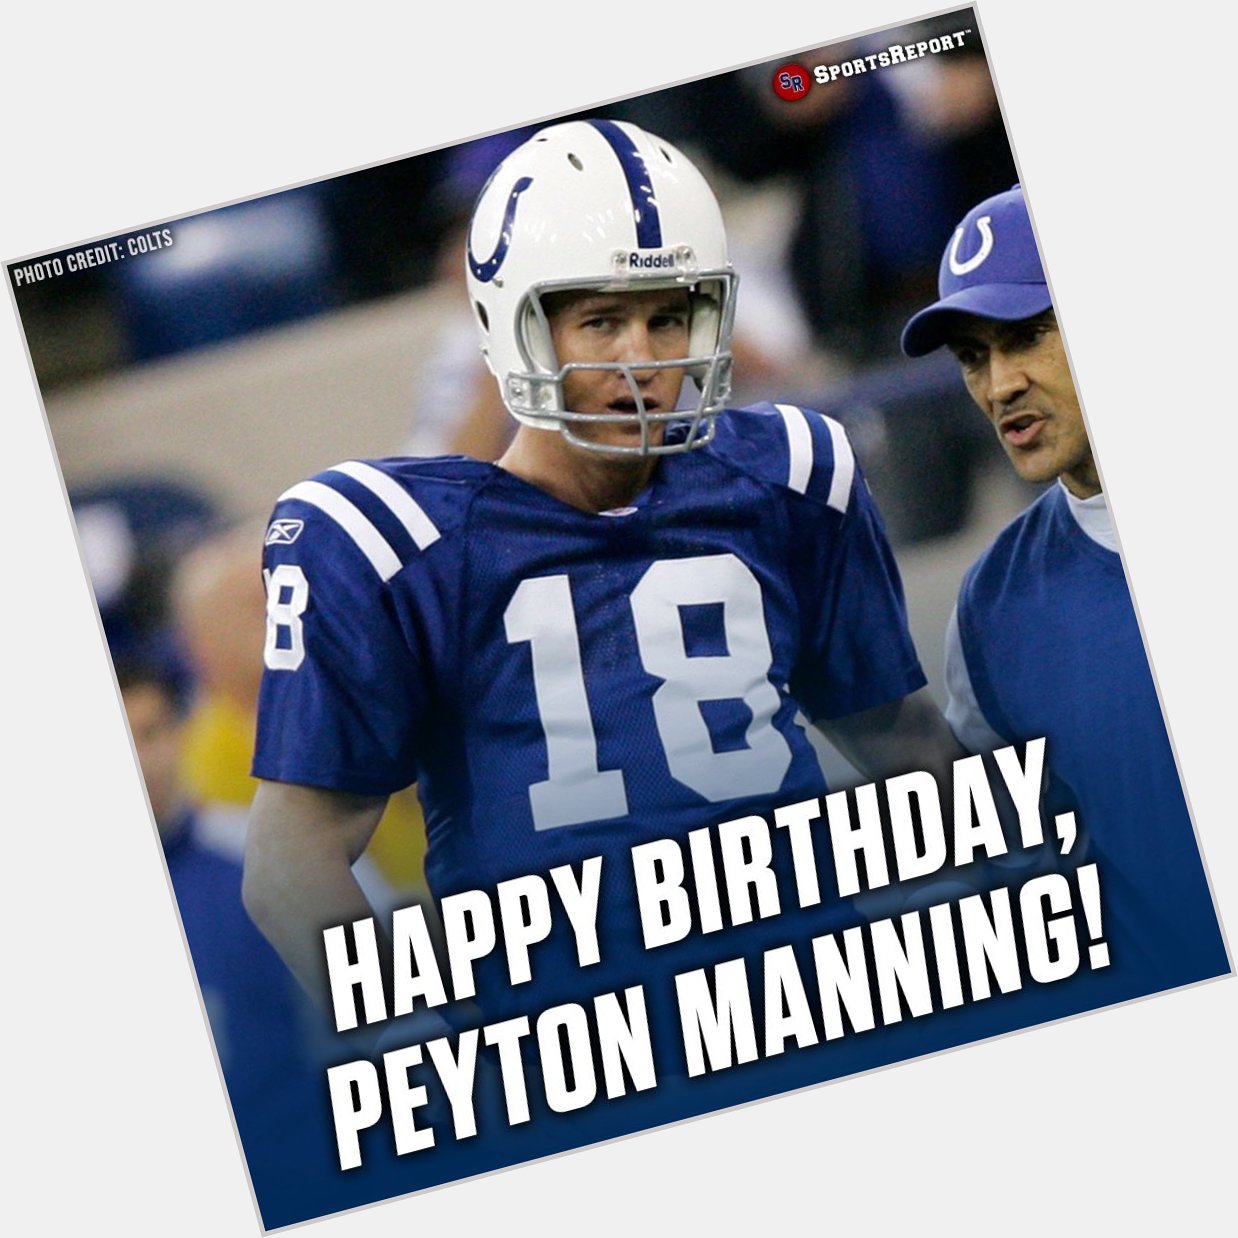  fans, let s wish a Happy Birthday to the Legendary Peyton Manning! 